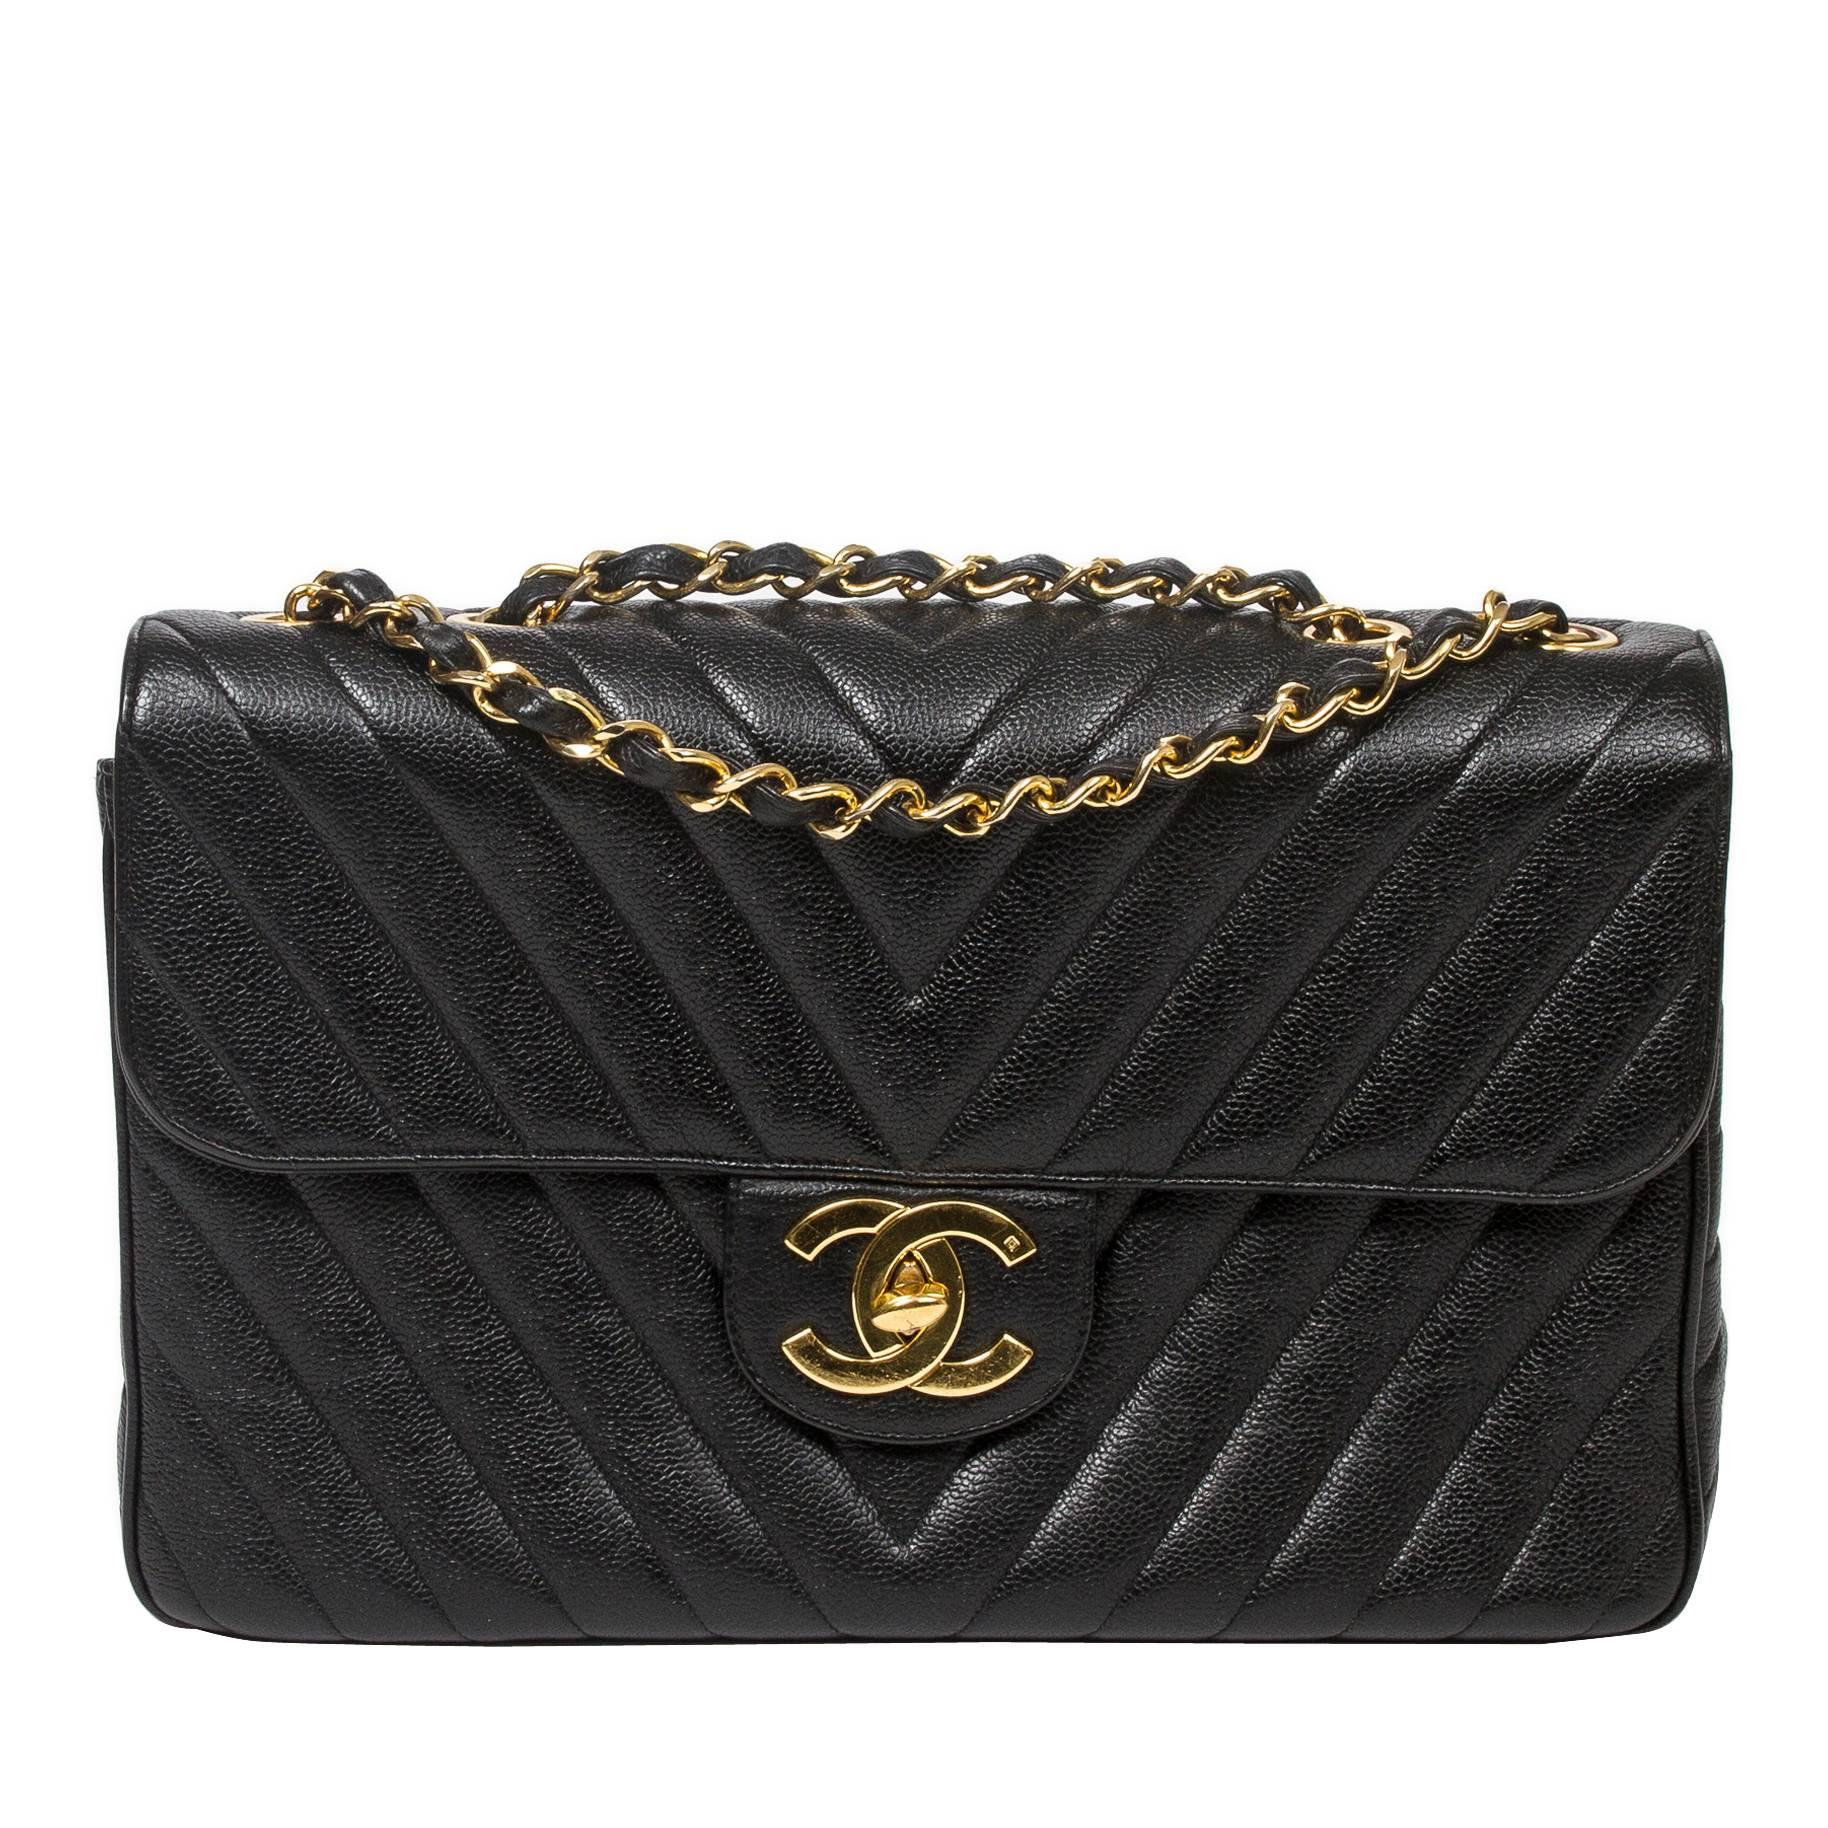 Chanel - Jumbo Maxi Chevron Quilted Caviar Leather